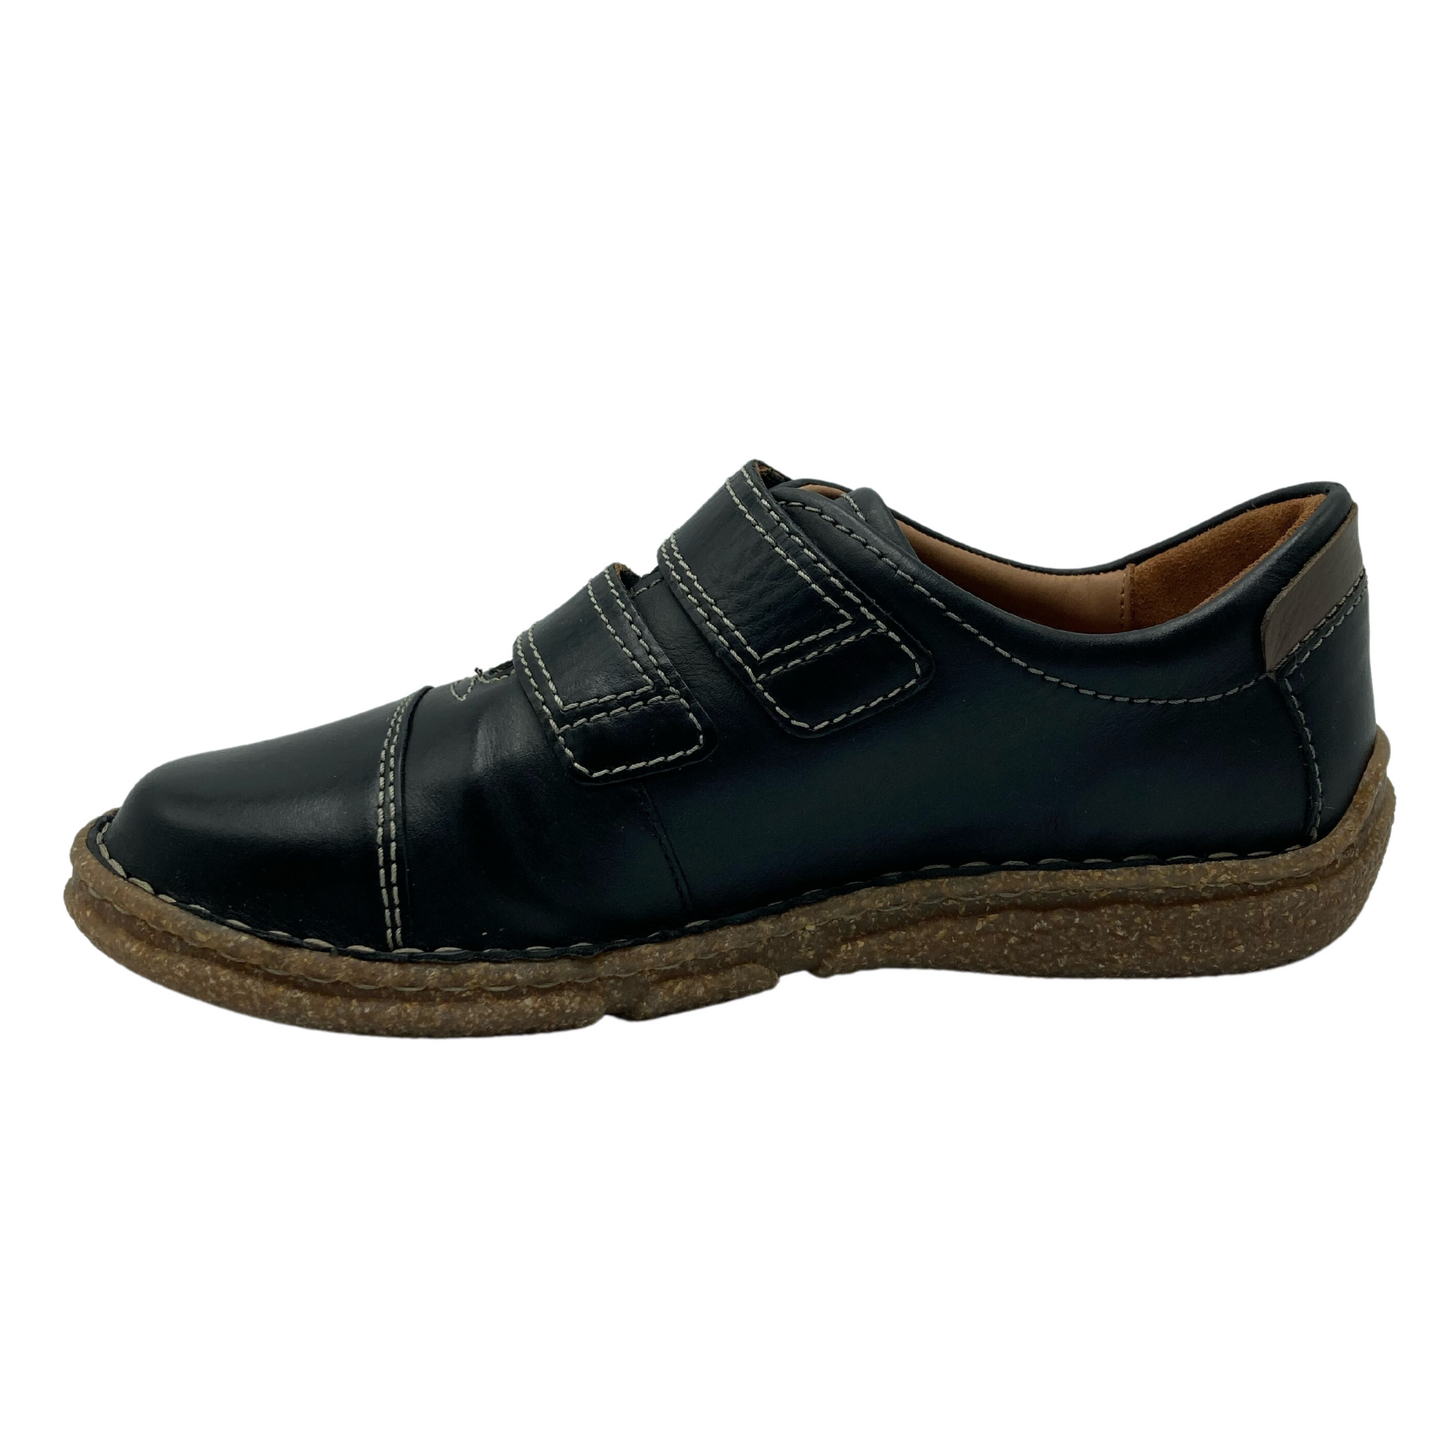 Left facing view of black leather walking shoe with double velcro  straps